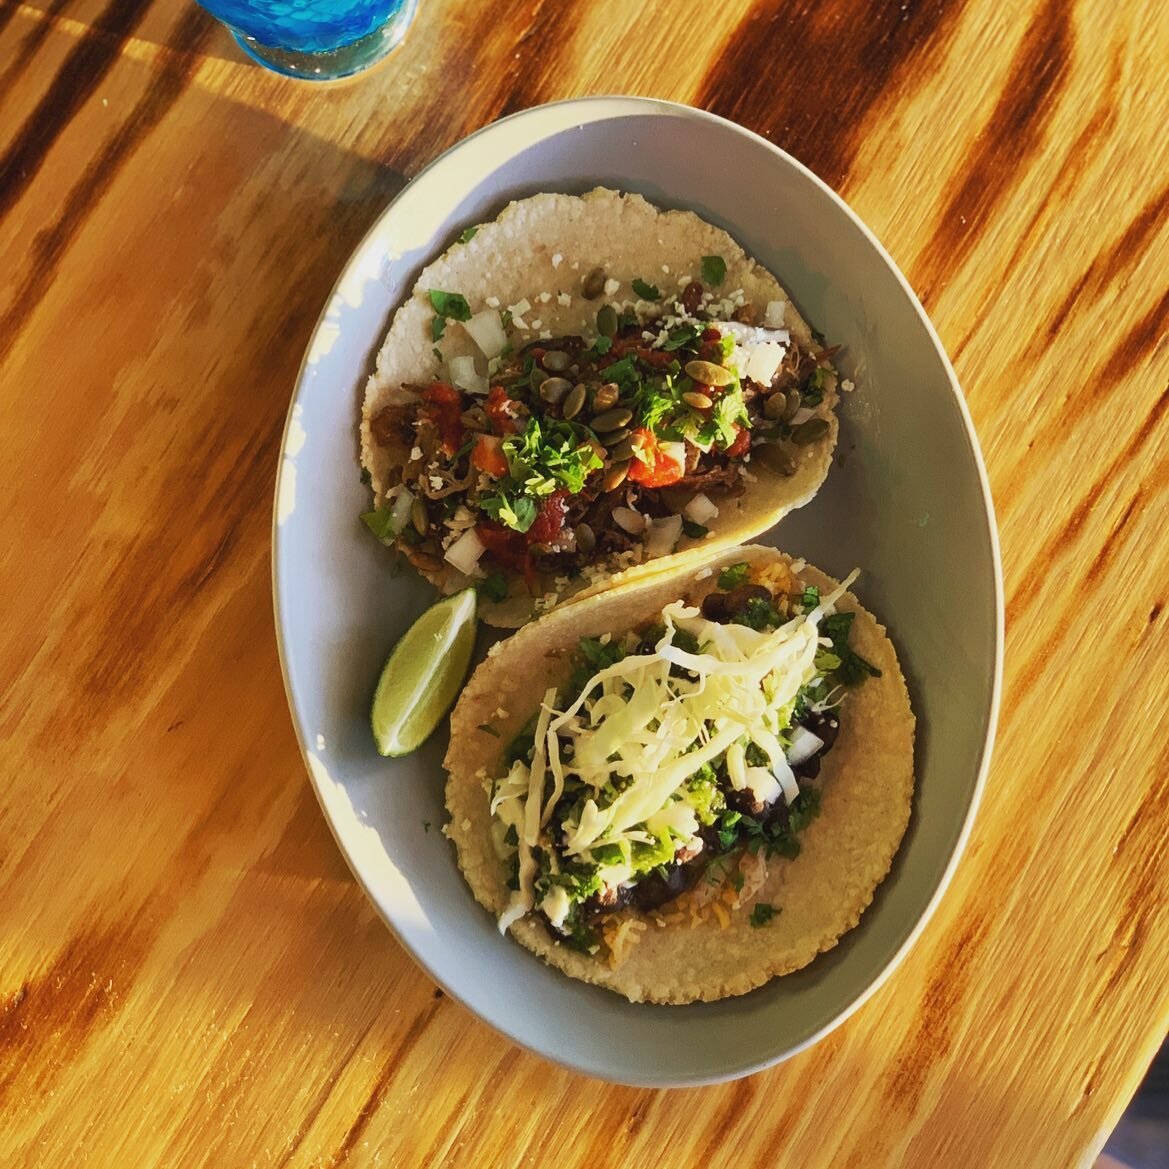 Tacos made with tortillas from scratch and house made salsa make all the difference. Plus Mezcal cocktails! 🍹 Open Tues-Sun and happy hour specials during the week. Brunch on Sat &amp; Sun